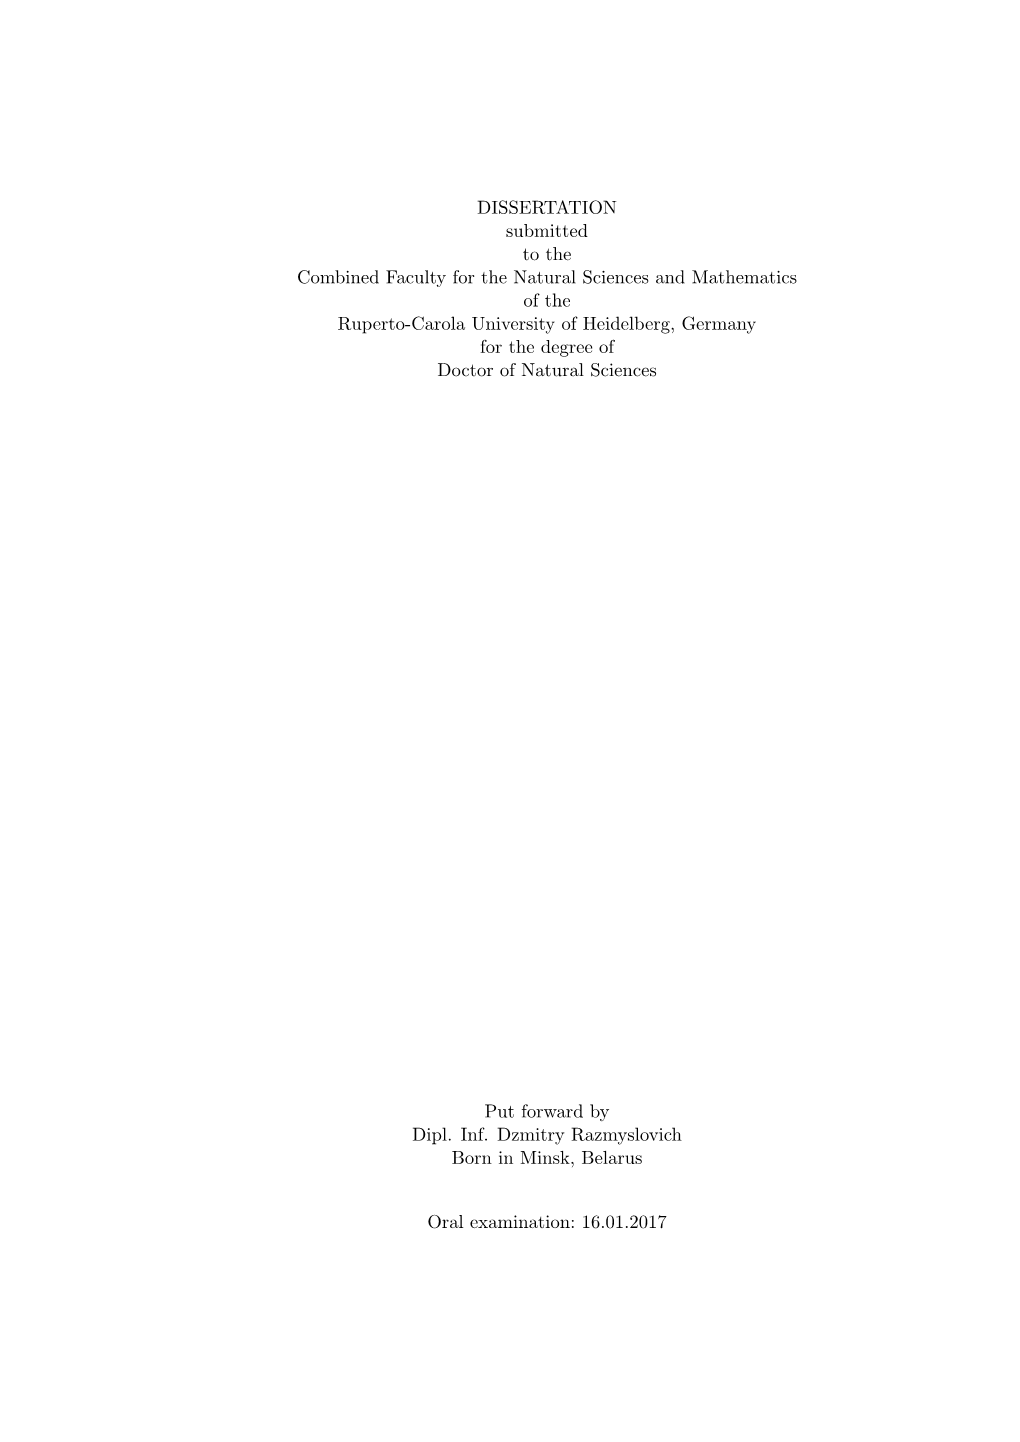 DISSERTATION Submitted to the Combined Faculty for the Natural